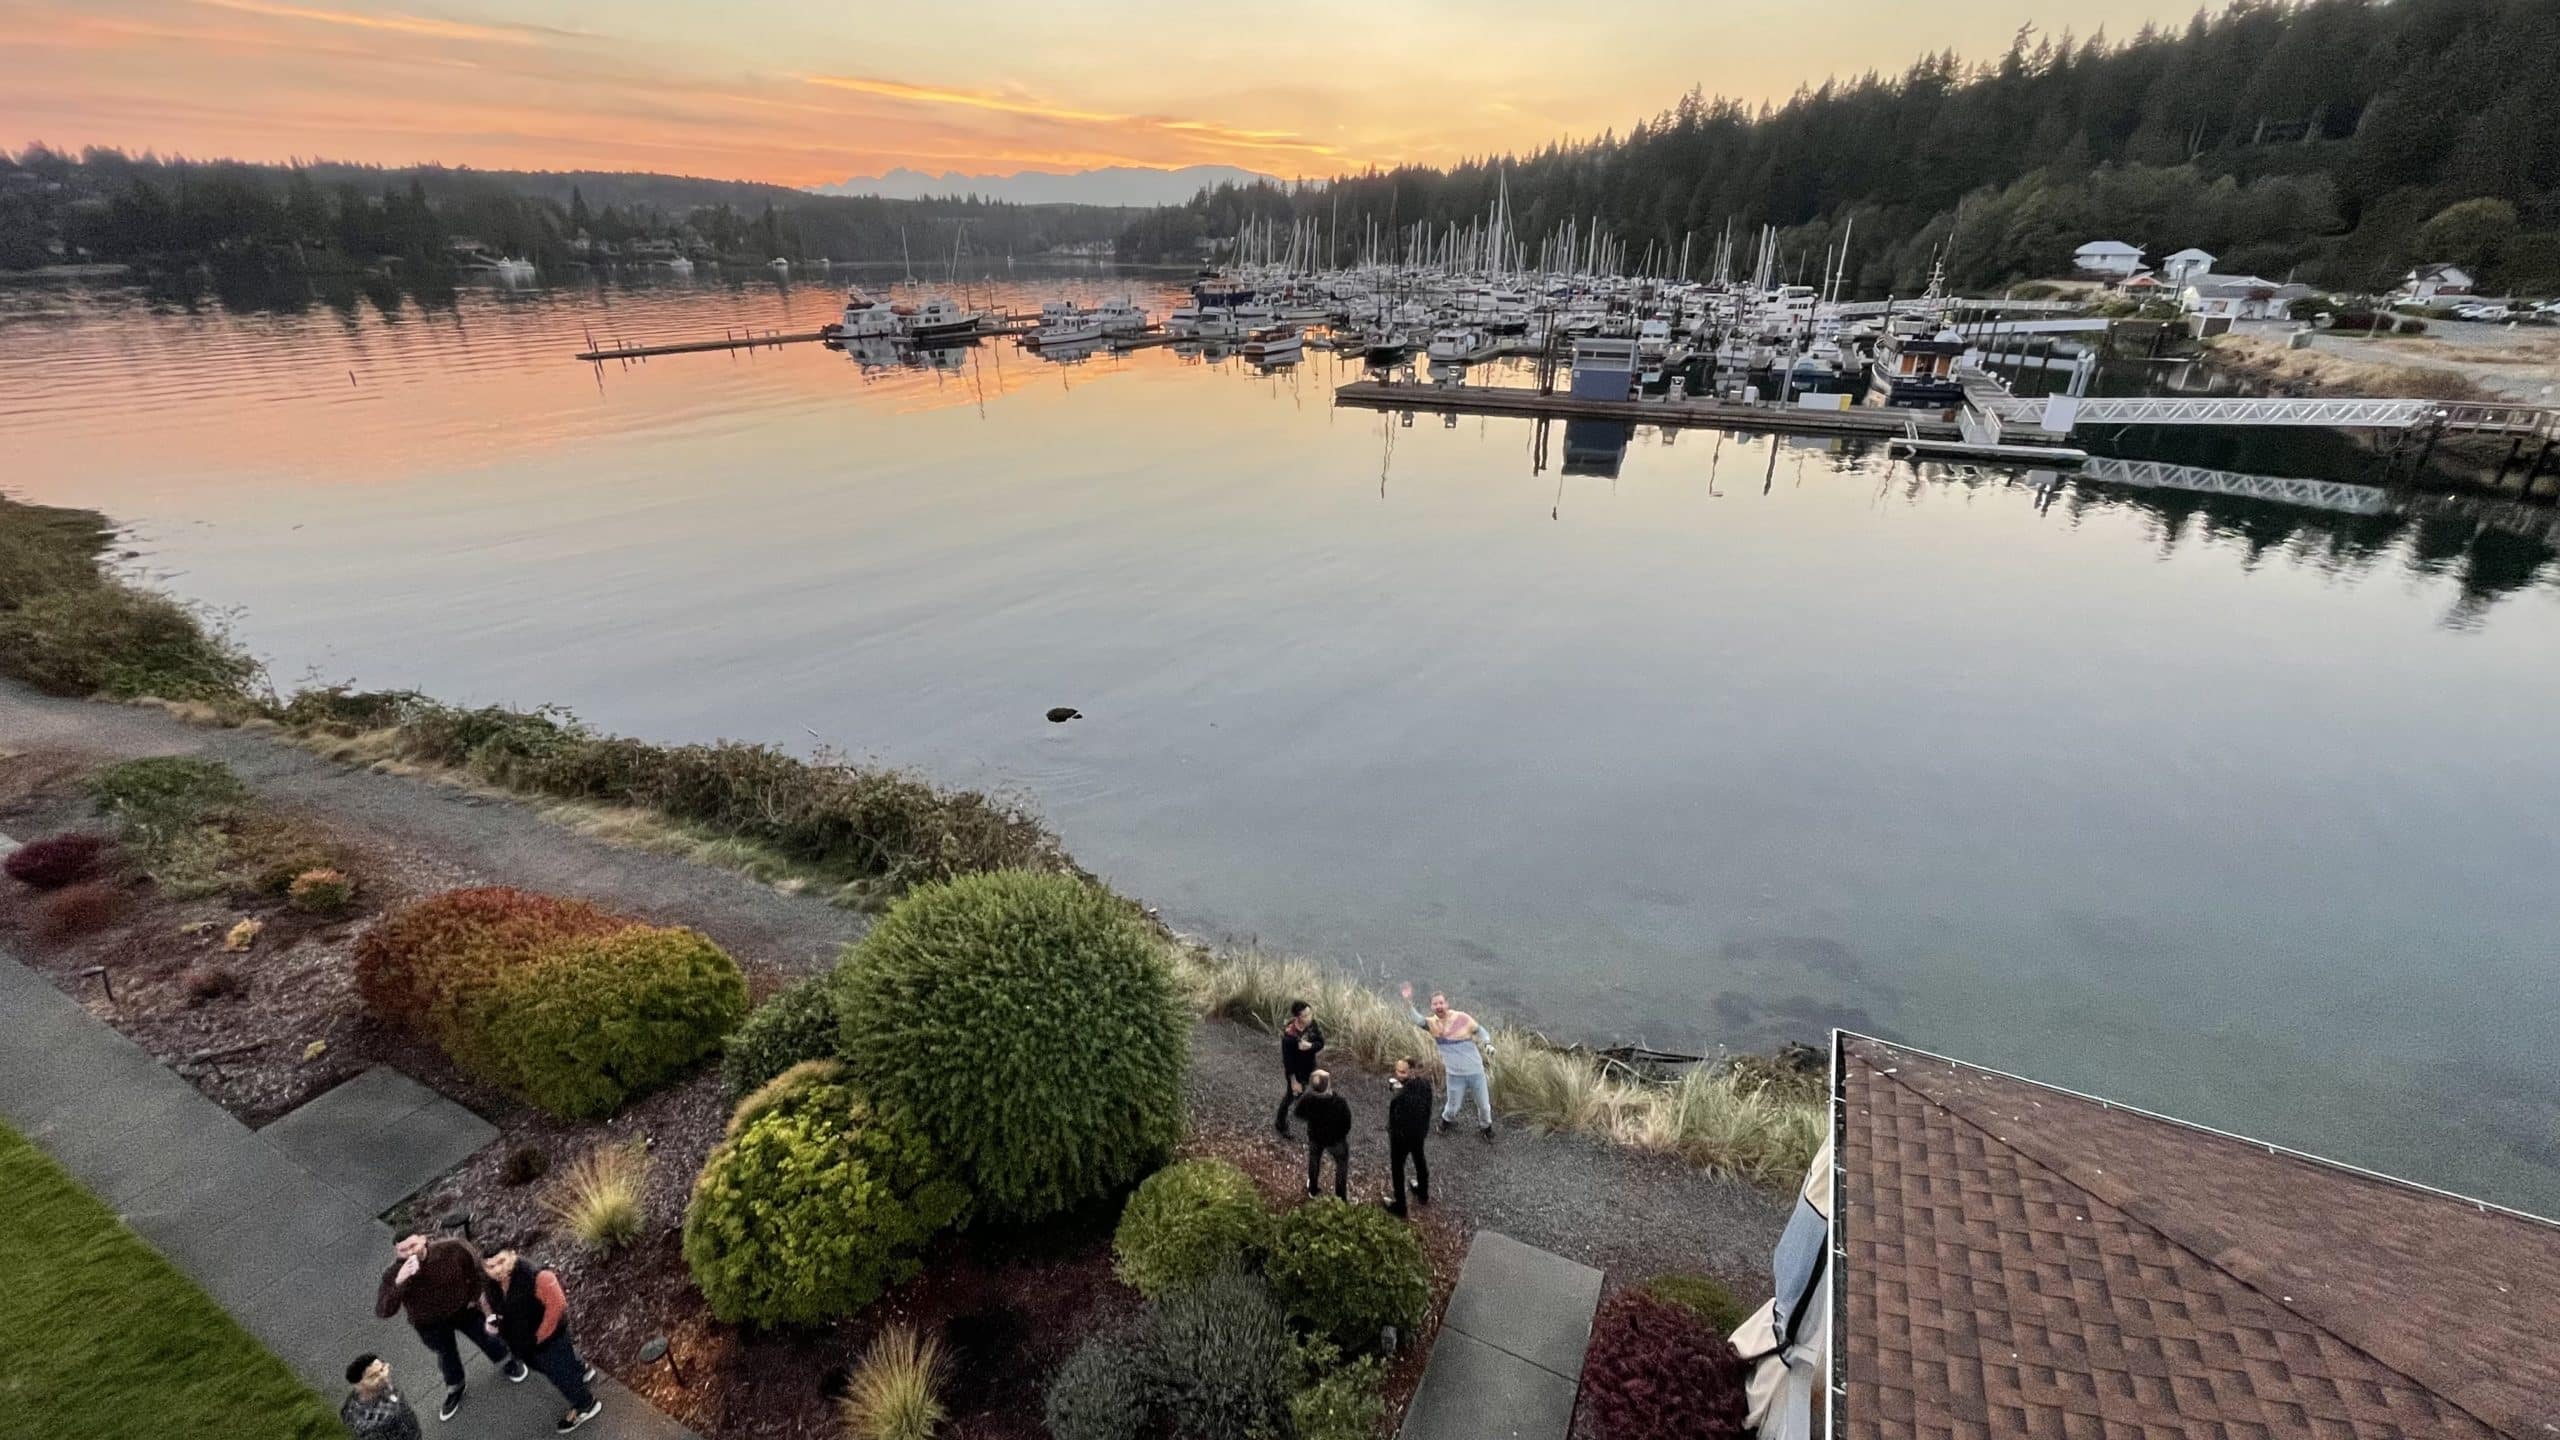 A bird's-eye view of the marina at Port Ludlow